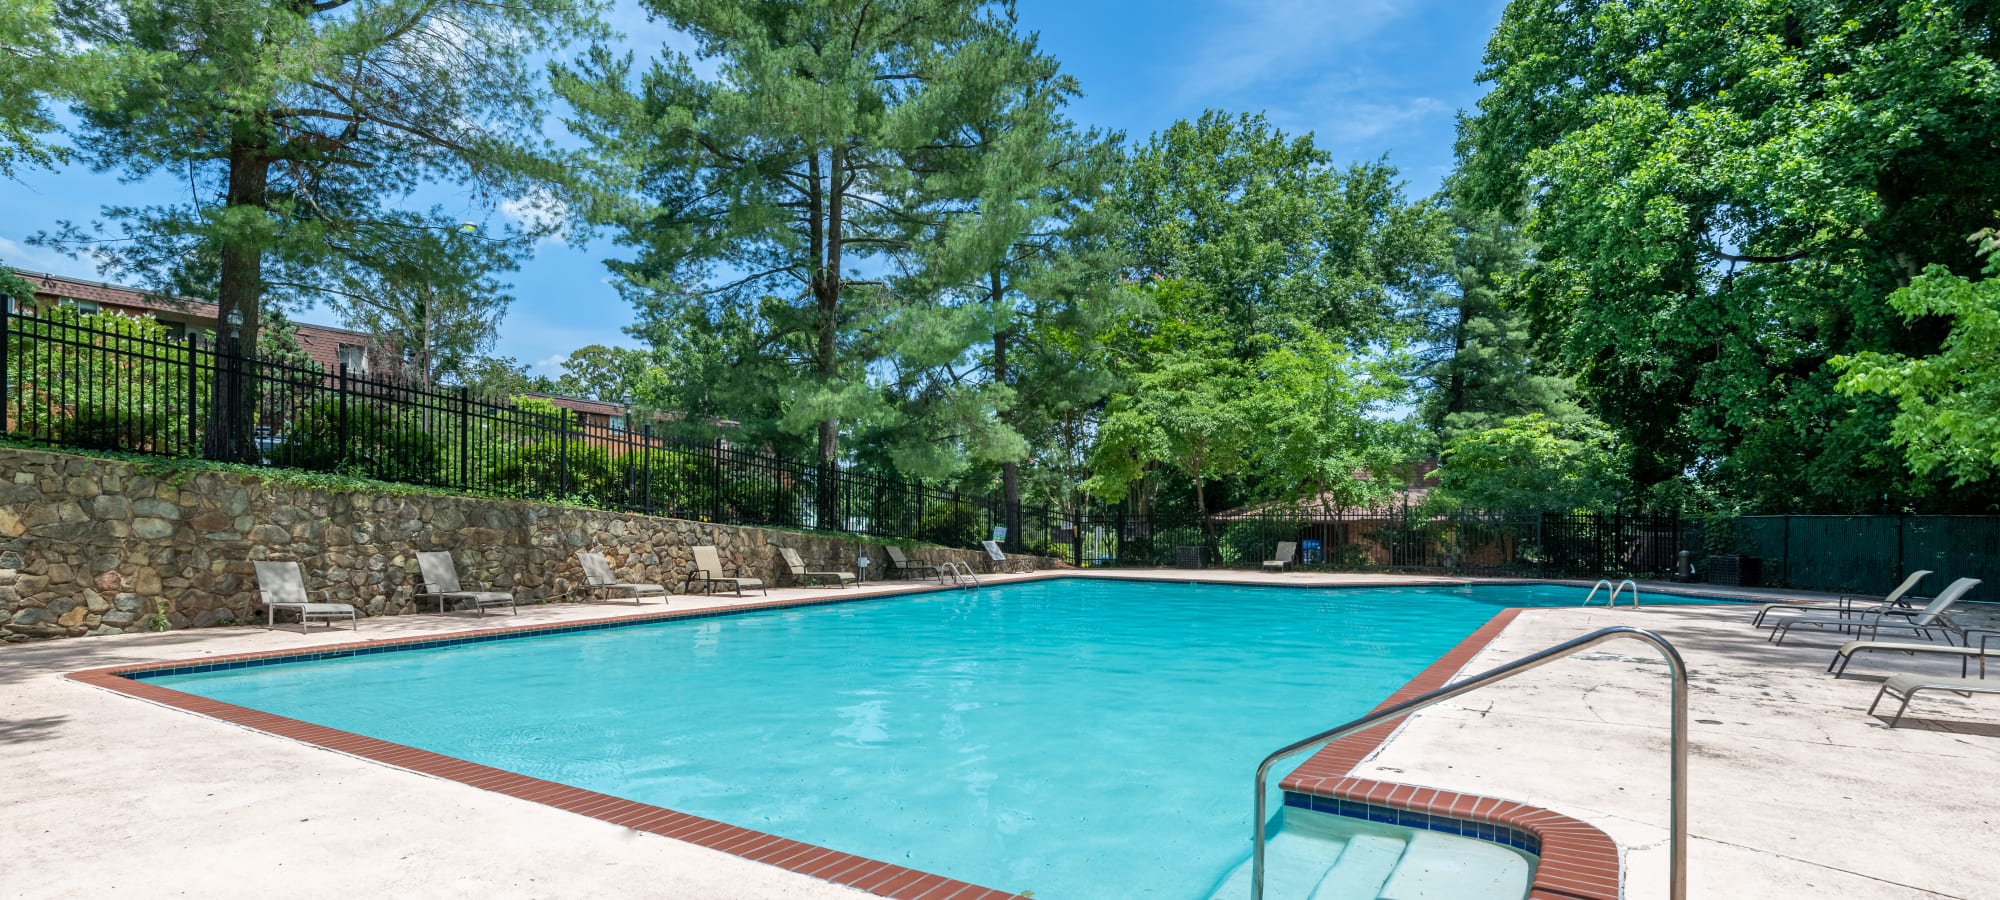 One of the two swimming pools at University Heights in Charlottesville, Virginia